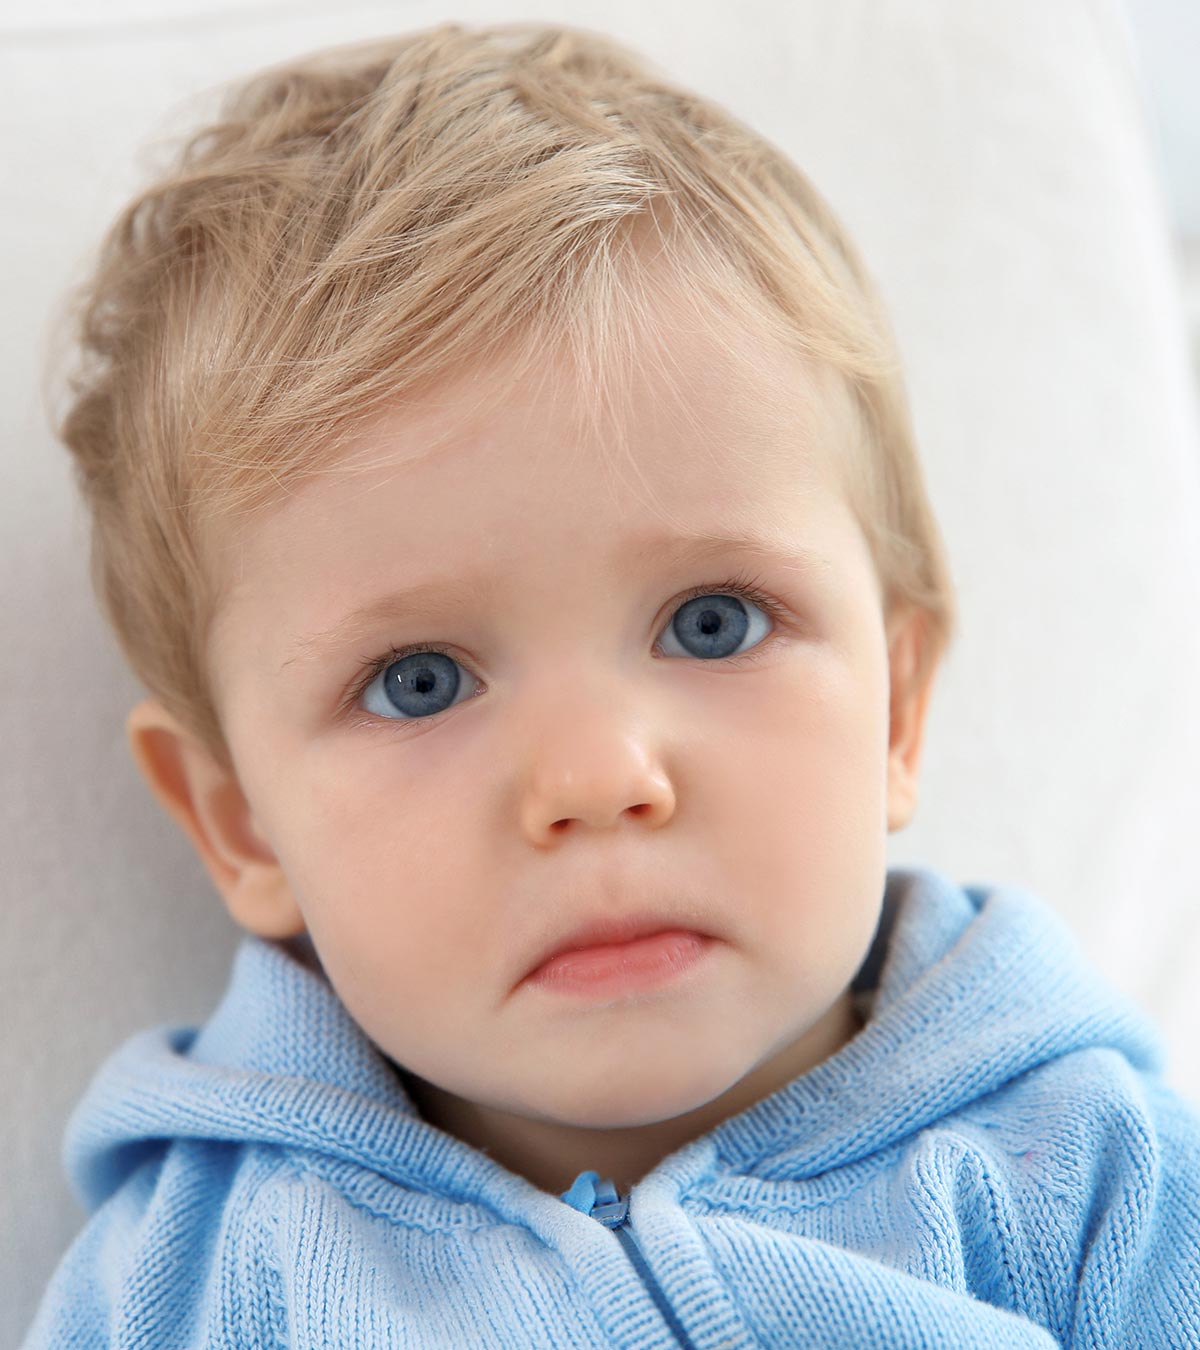 5 Causes Of Stuttering In Toddlers, Symptoms And Treatment